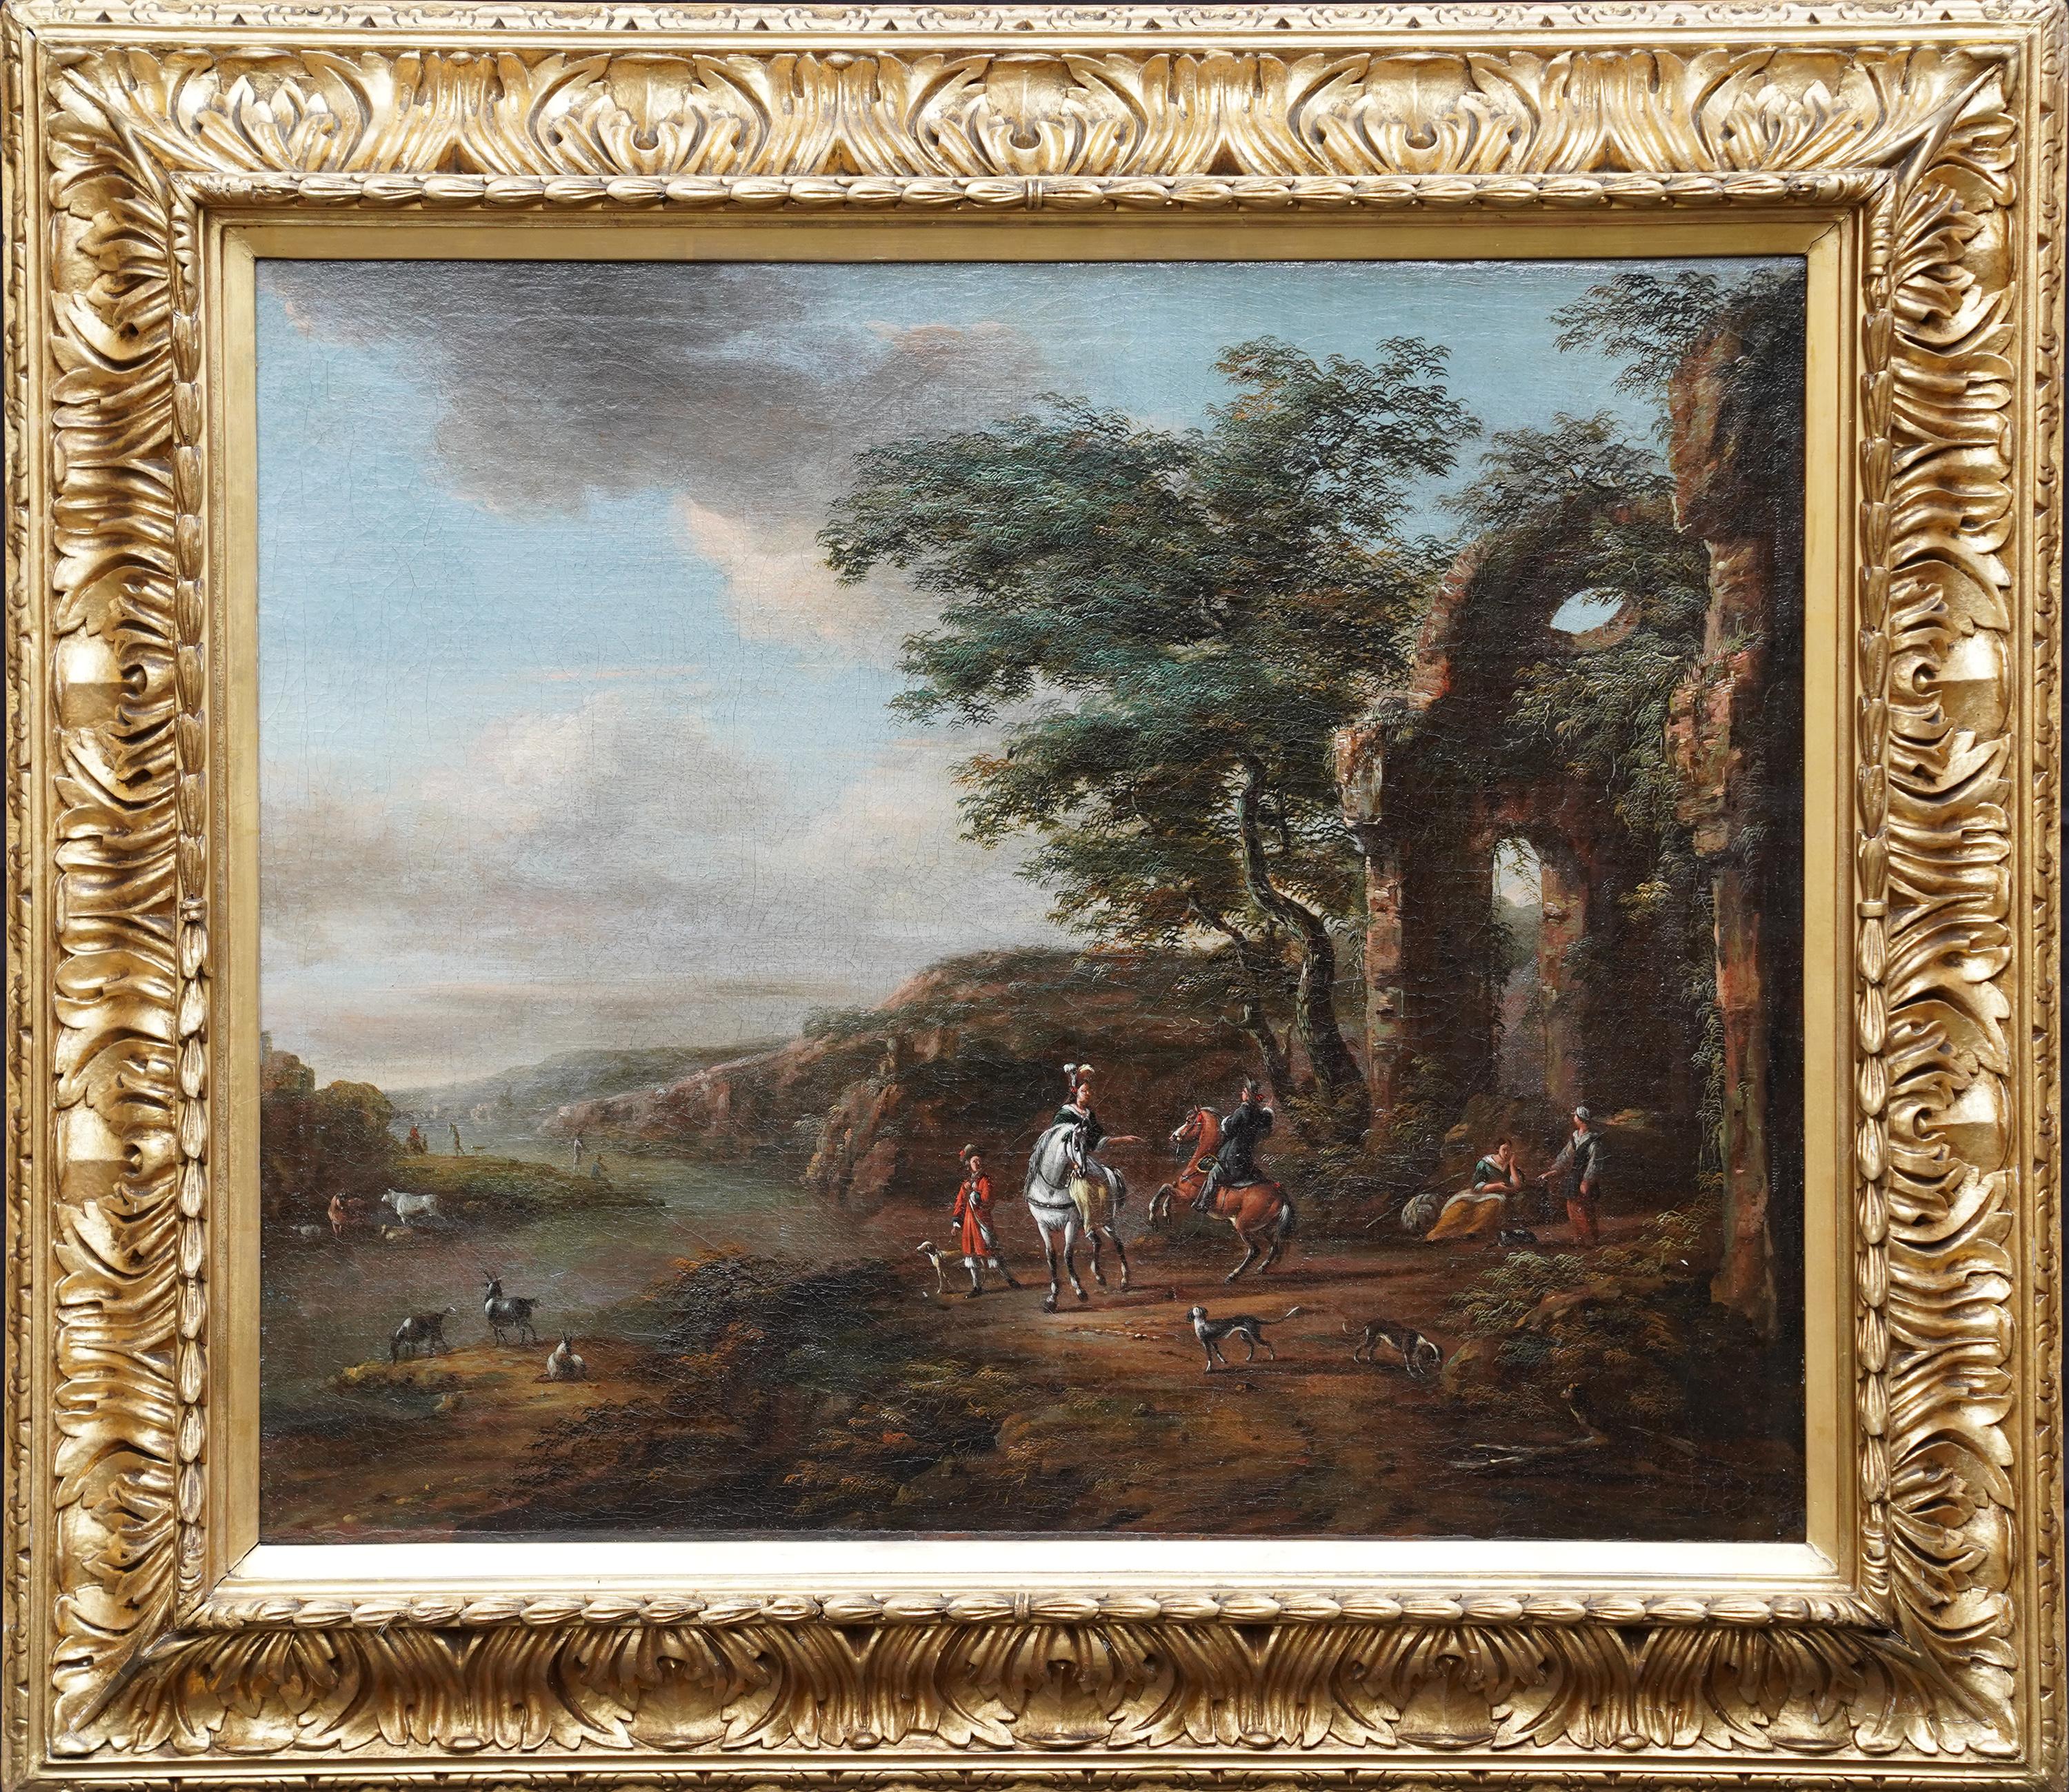 Pieter Wouwerman Figurative Painting - Travellers and Dogs in Landscape, Ruins on Right - Dutch Old Master oil painting